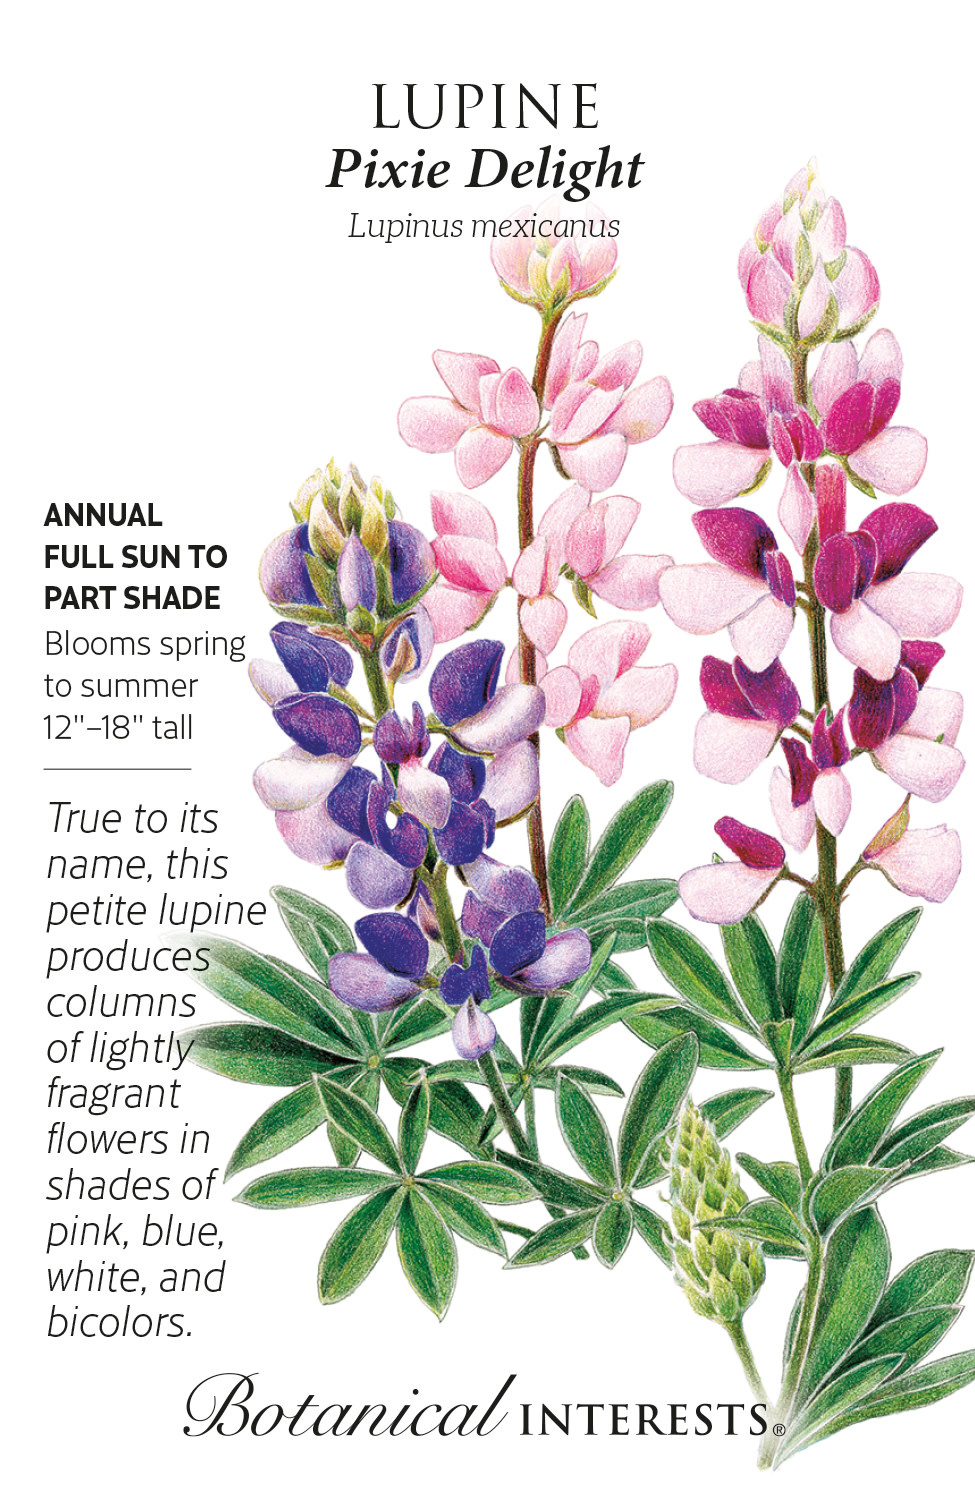 Seed Flwr Lupine Pixie Delight - Lupinus mexicanus